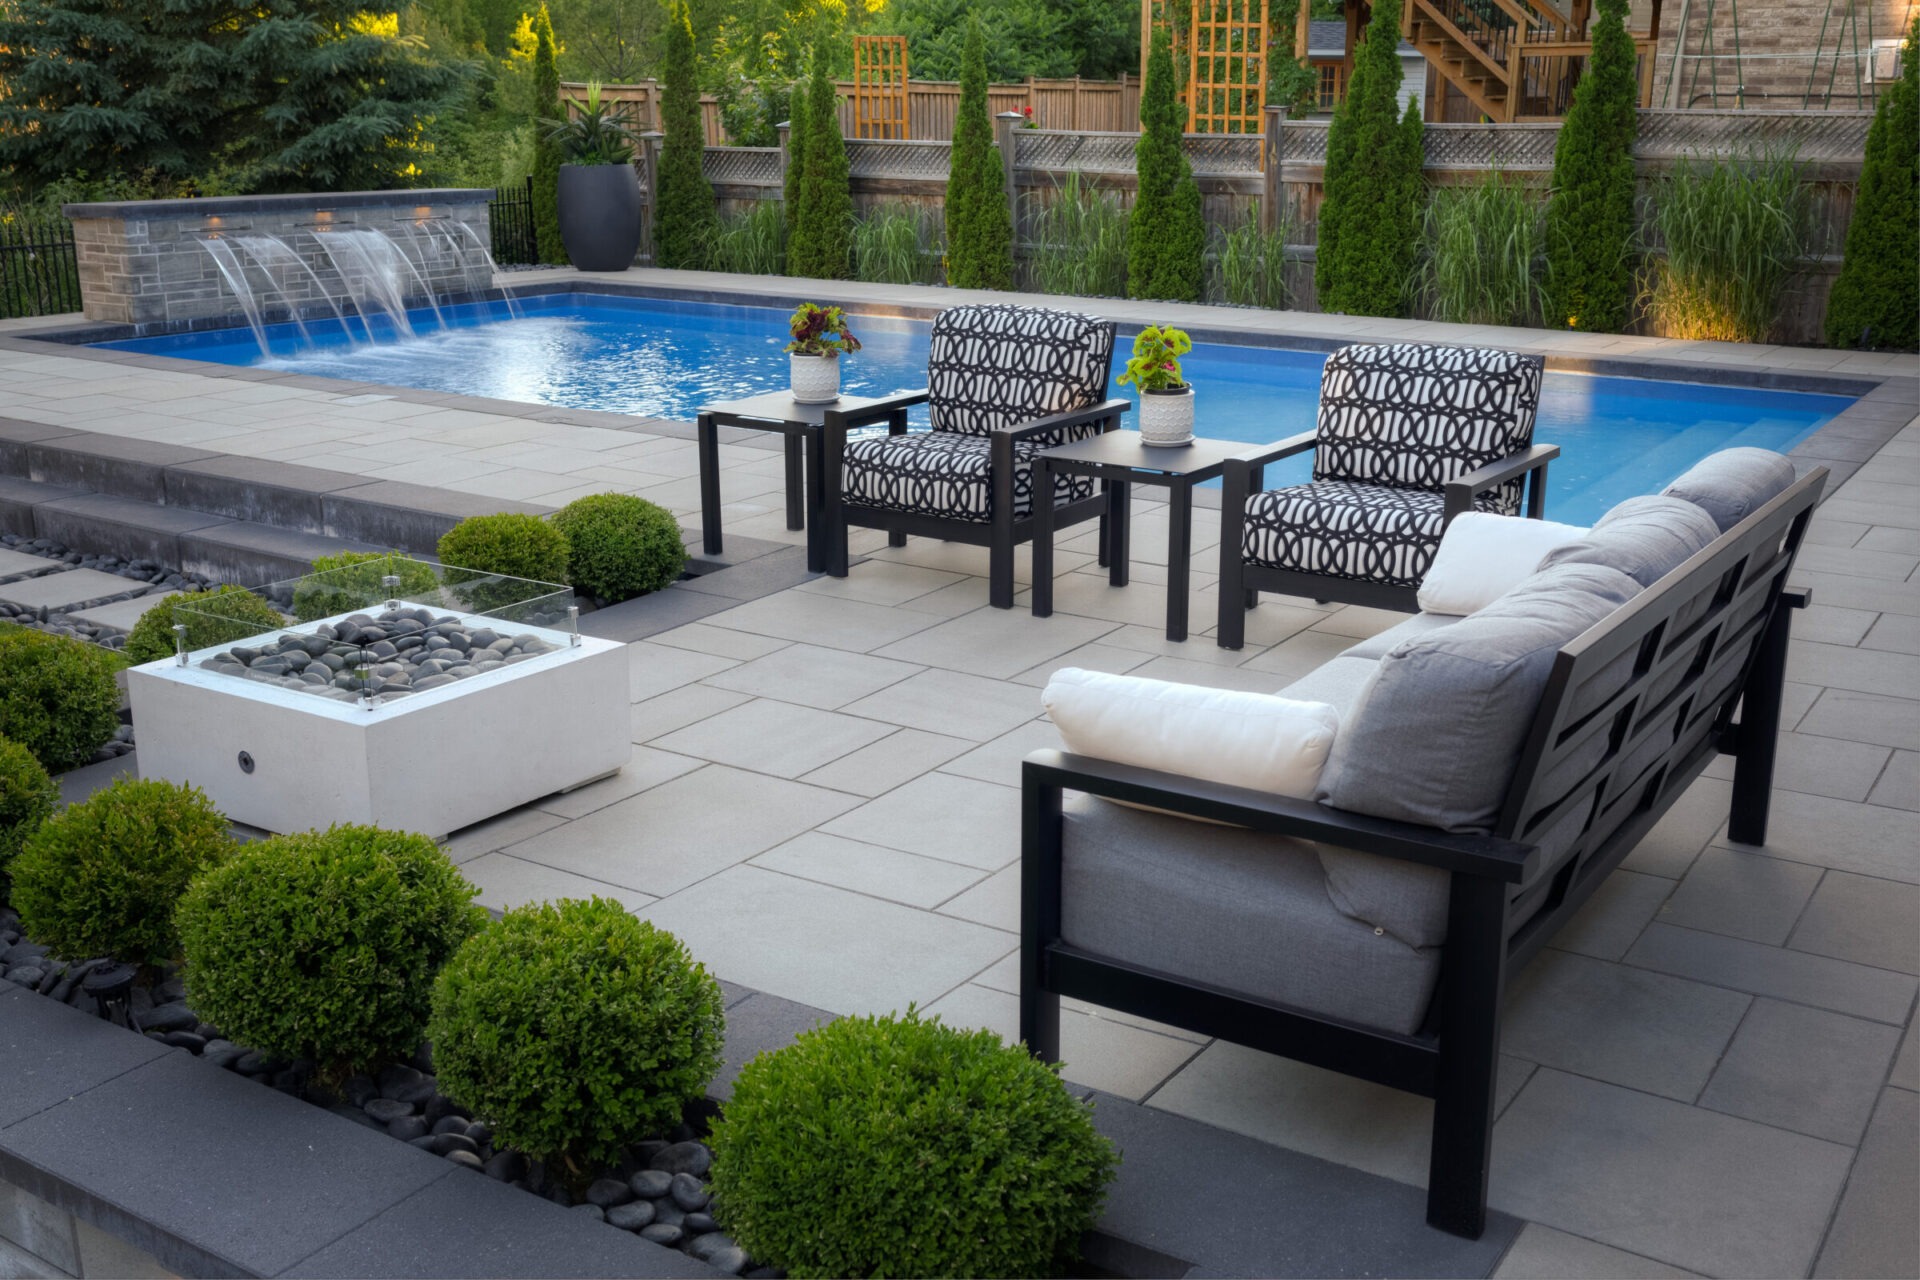 This image shows a luxurious outdoor patio with a blue pool, waterfall feature, stylish seating, landscaped bushes, and a fire pit table.